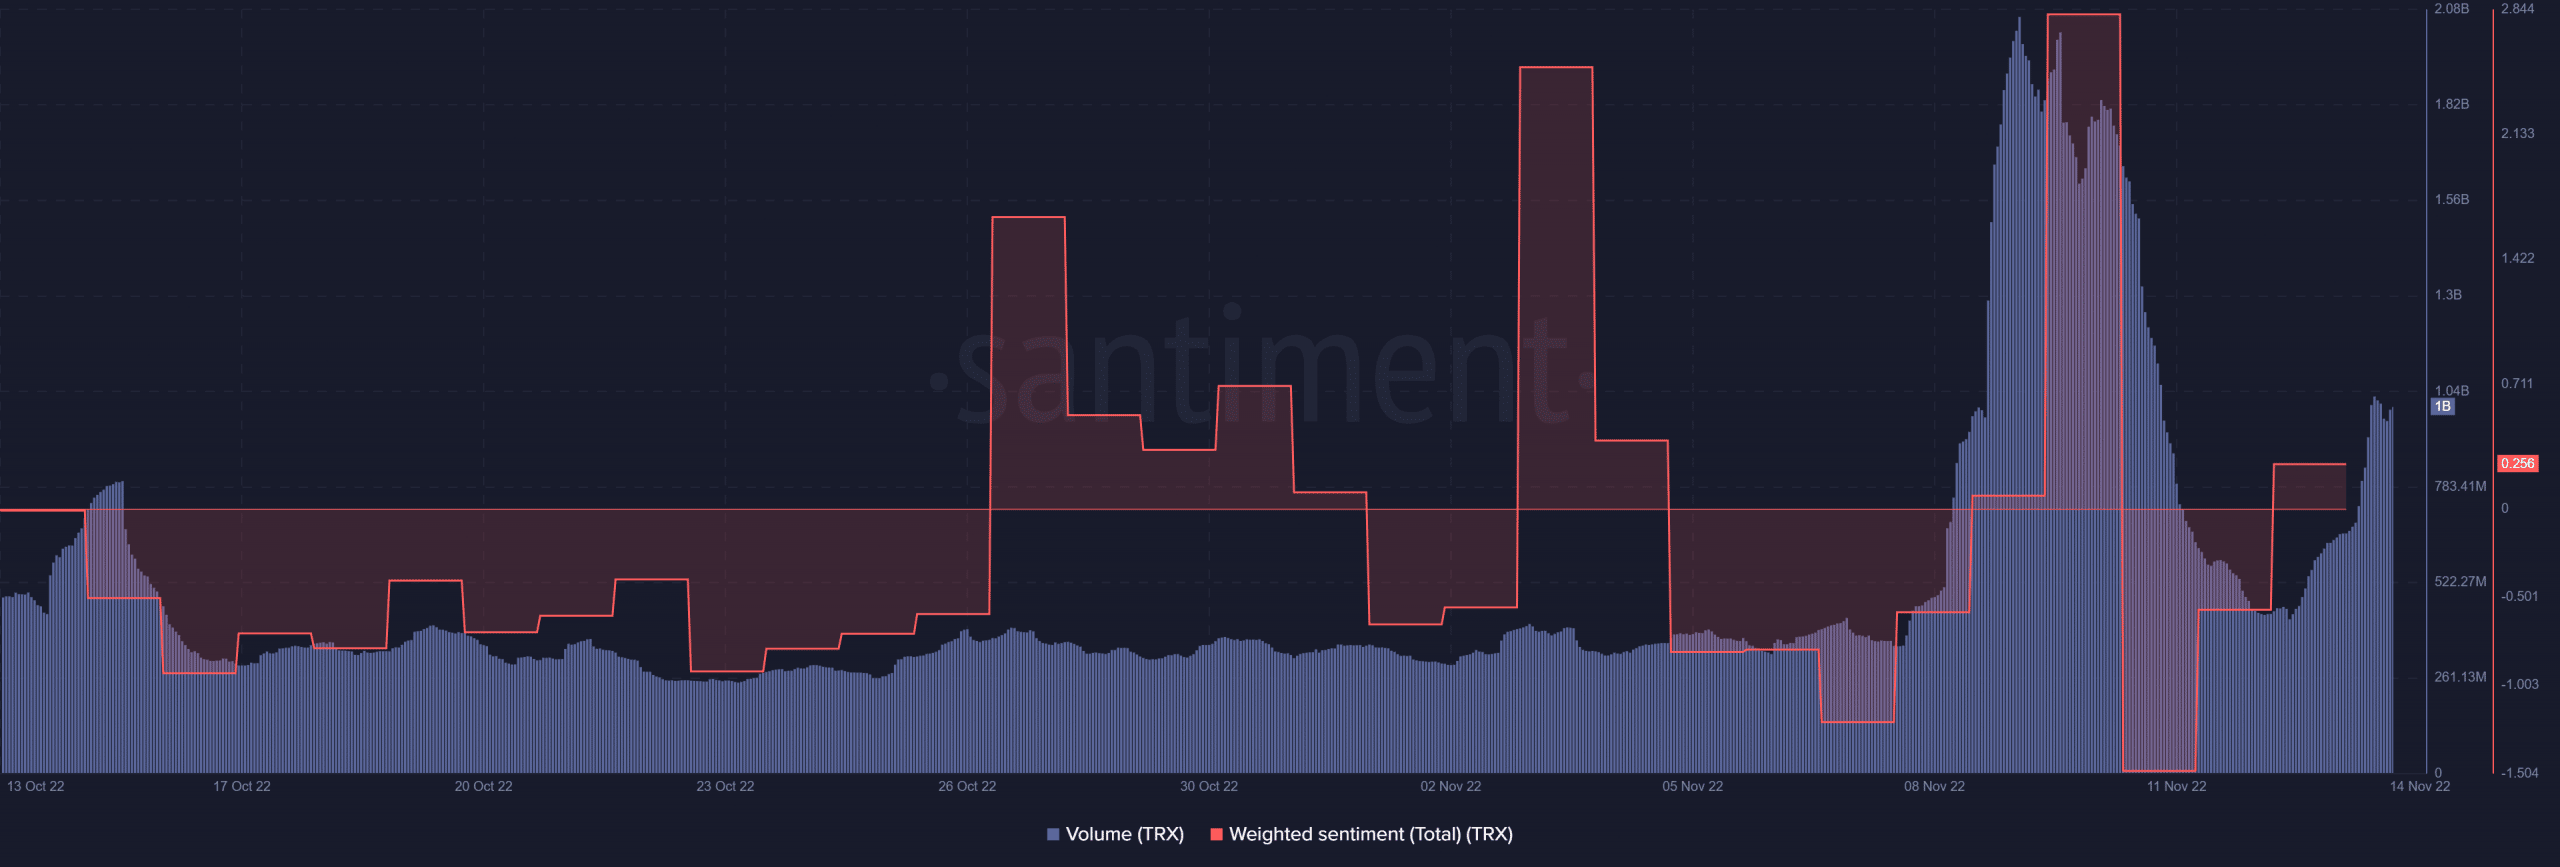 TRX sentiment and volume changes